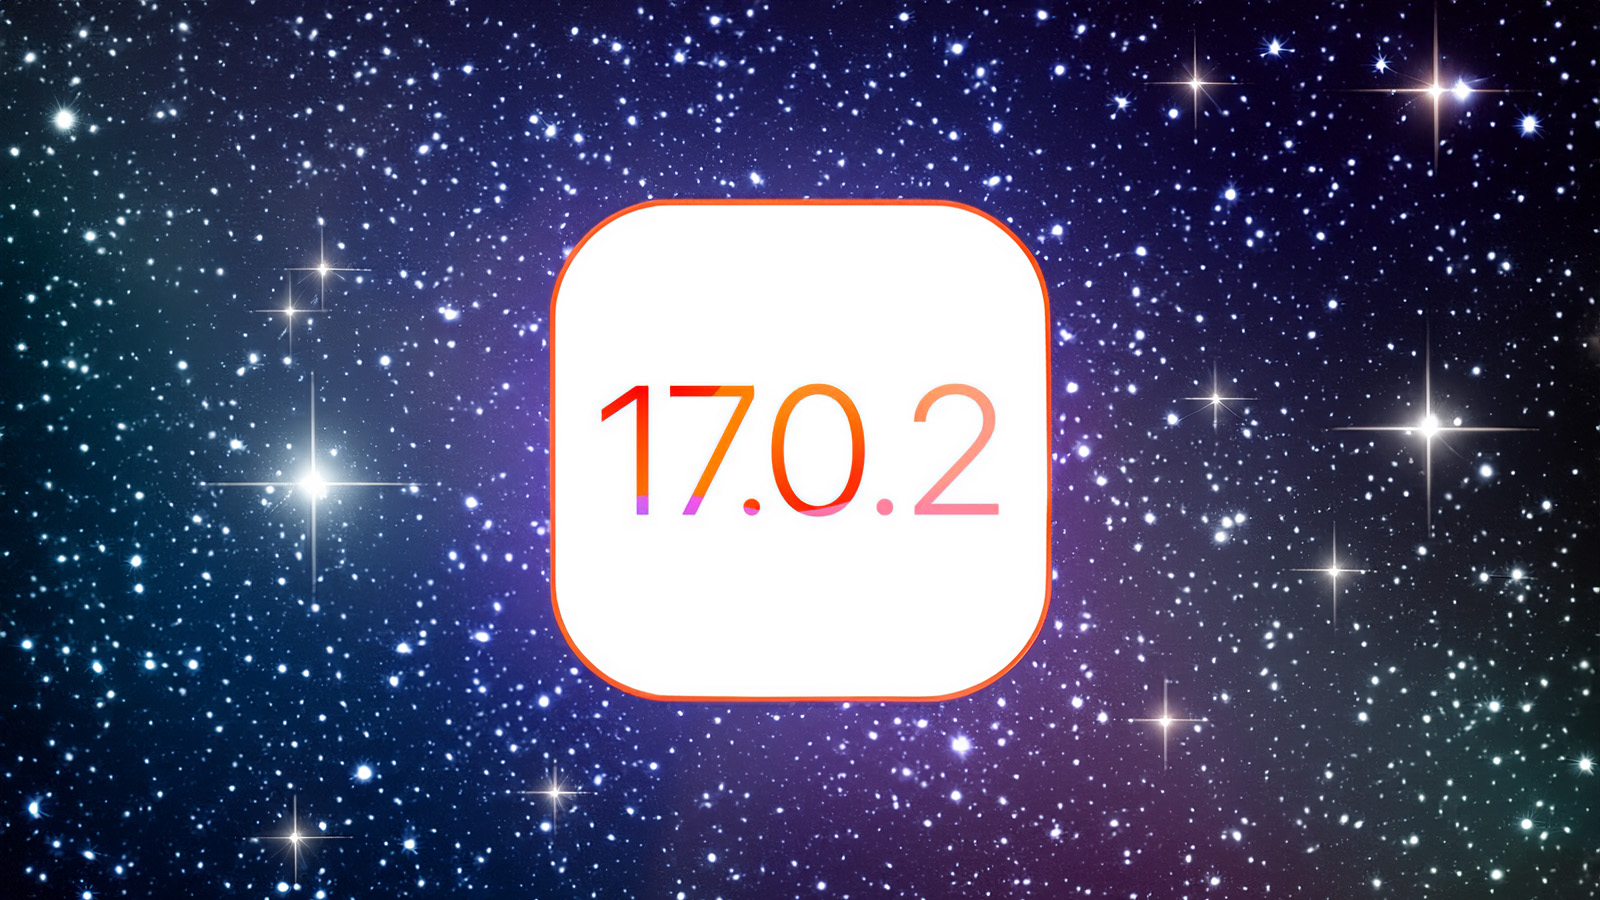 From iPhoneIslam.com, starry wallpaper with text 17 7 2 featuring Apple and iOS.